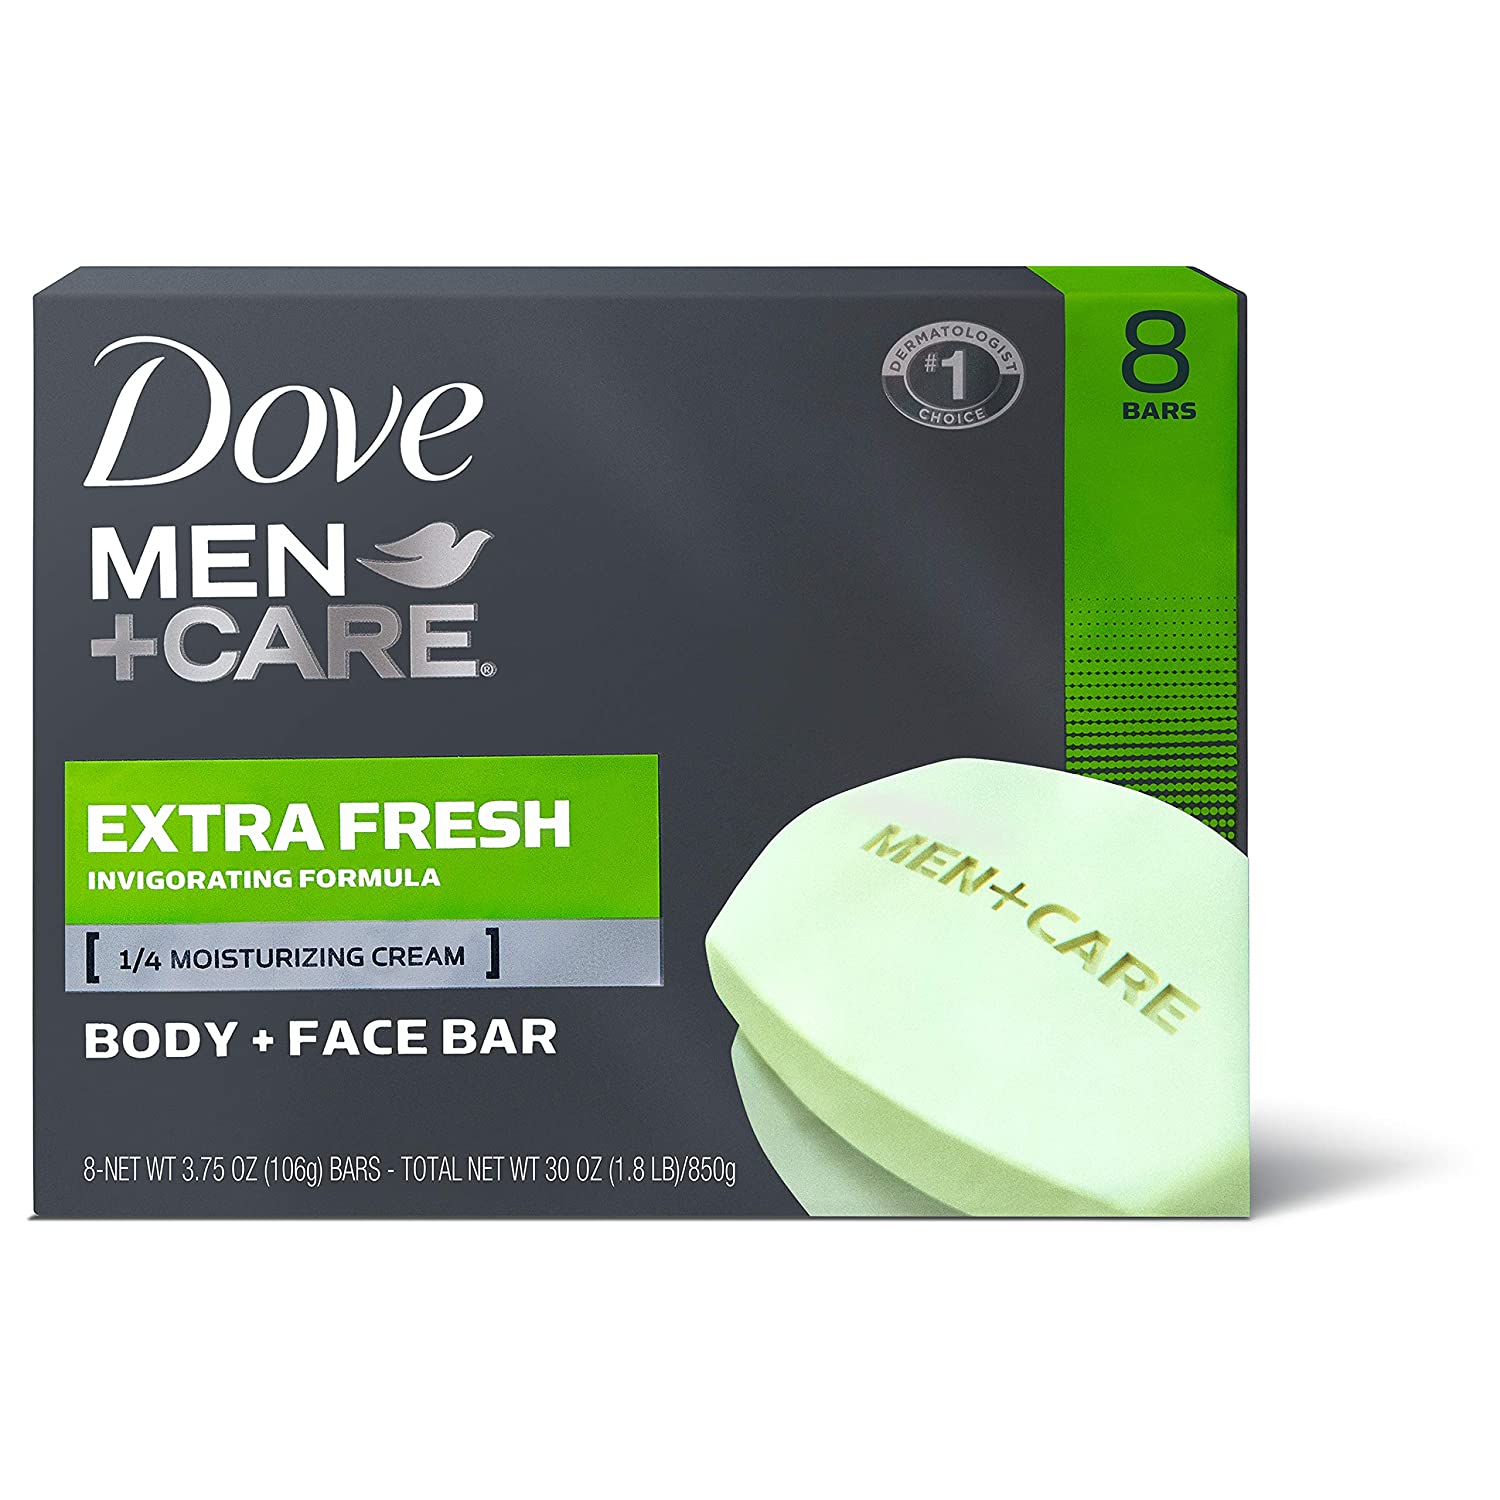 Dove Men+Care 3 in 1 Bar Cleanser for Body, Face, and Shaving